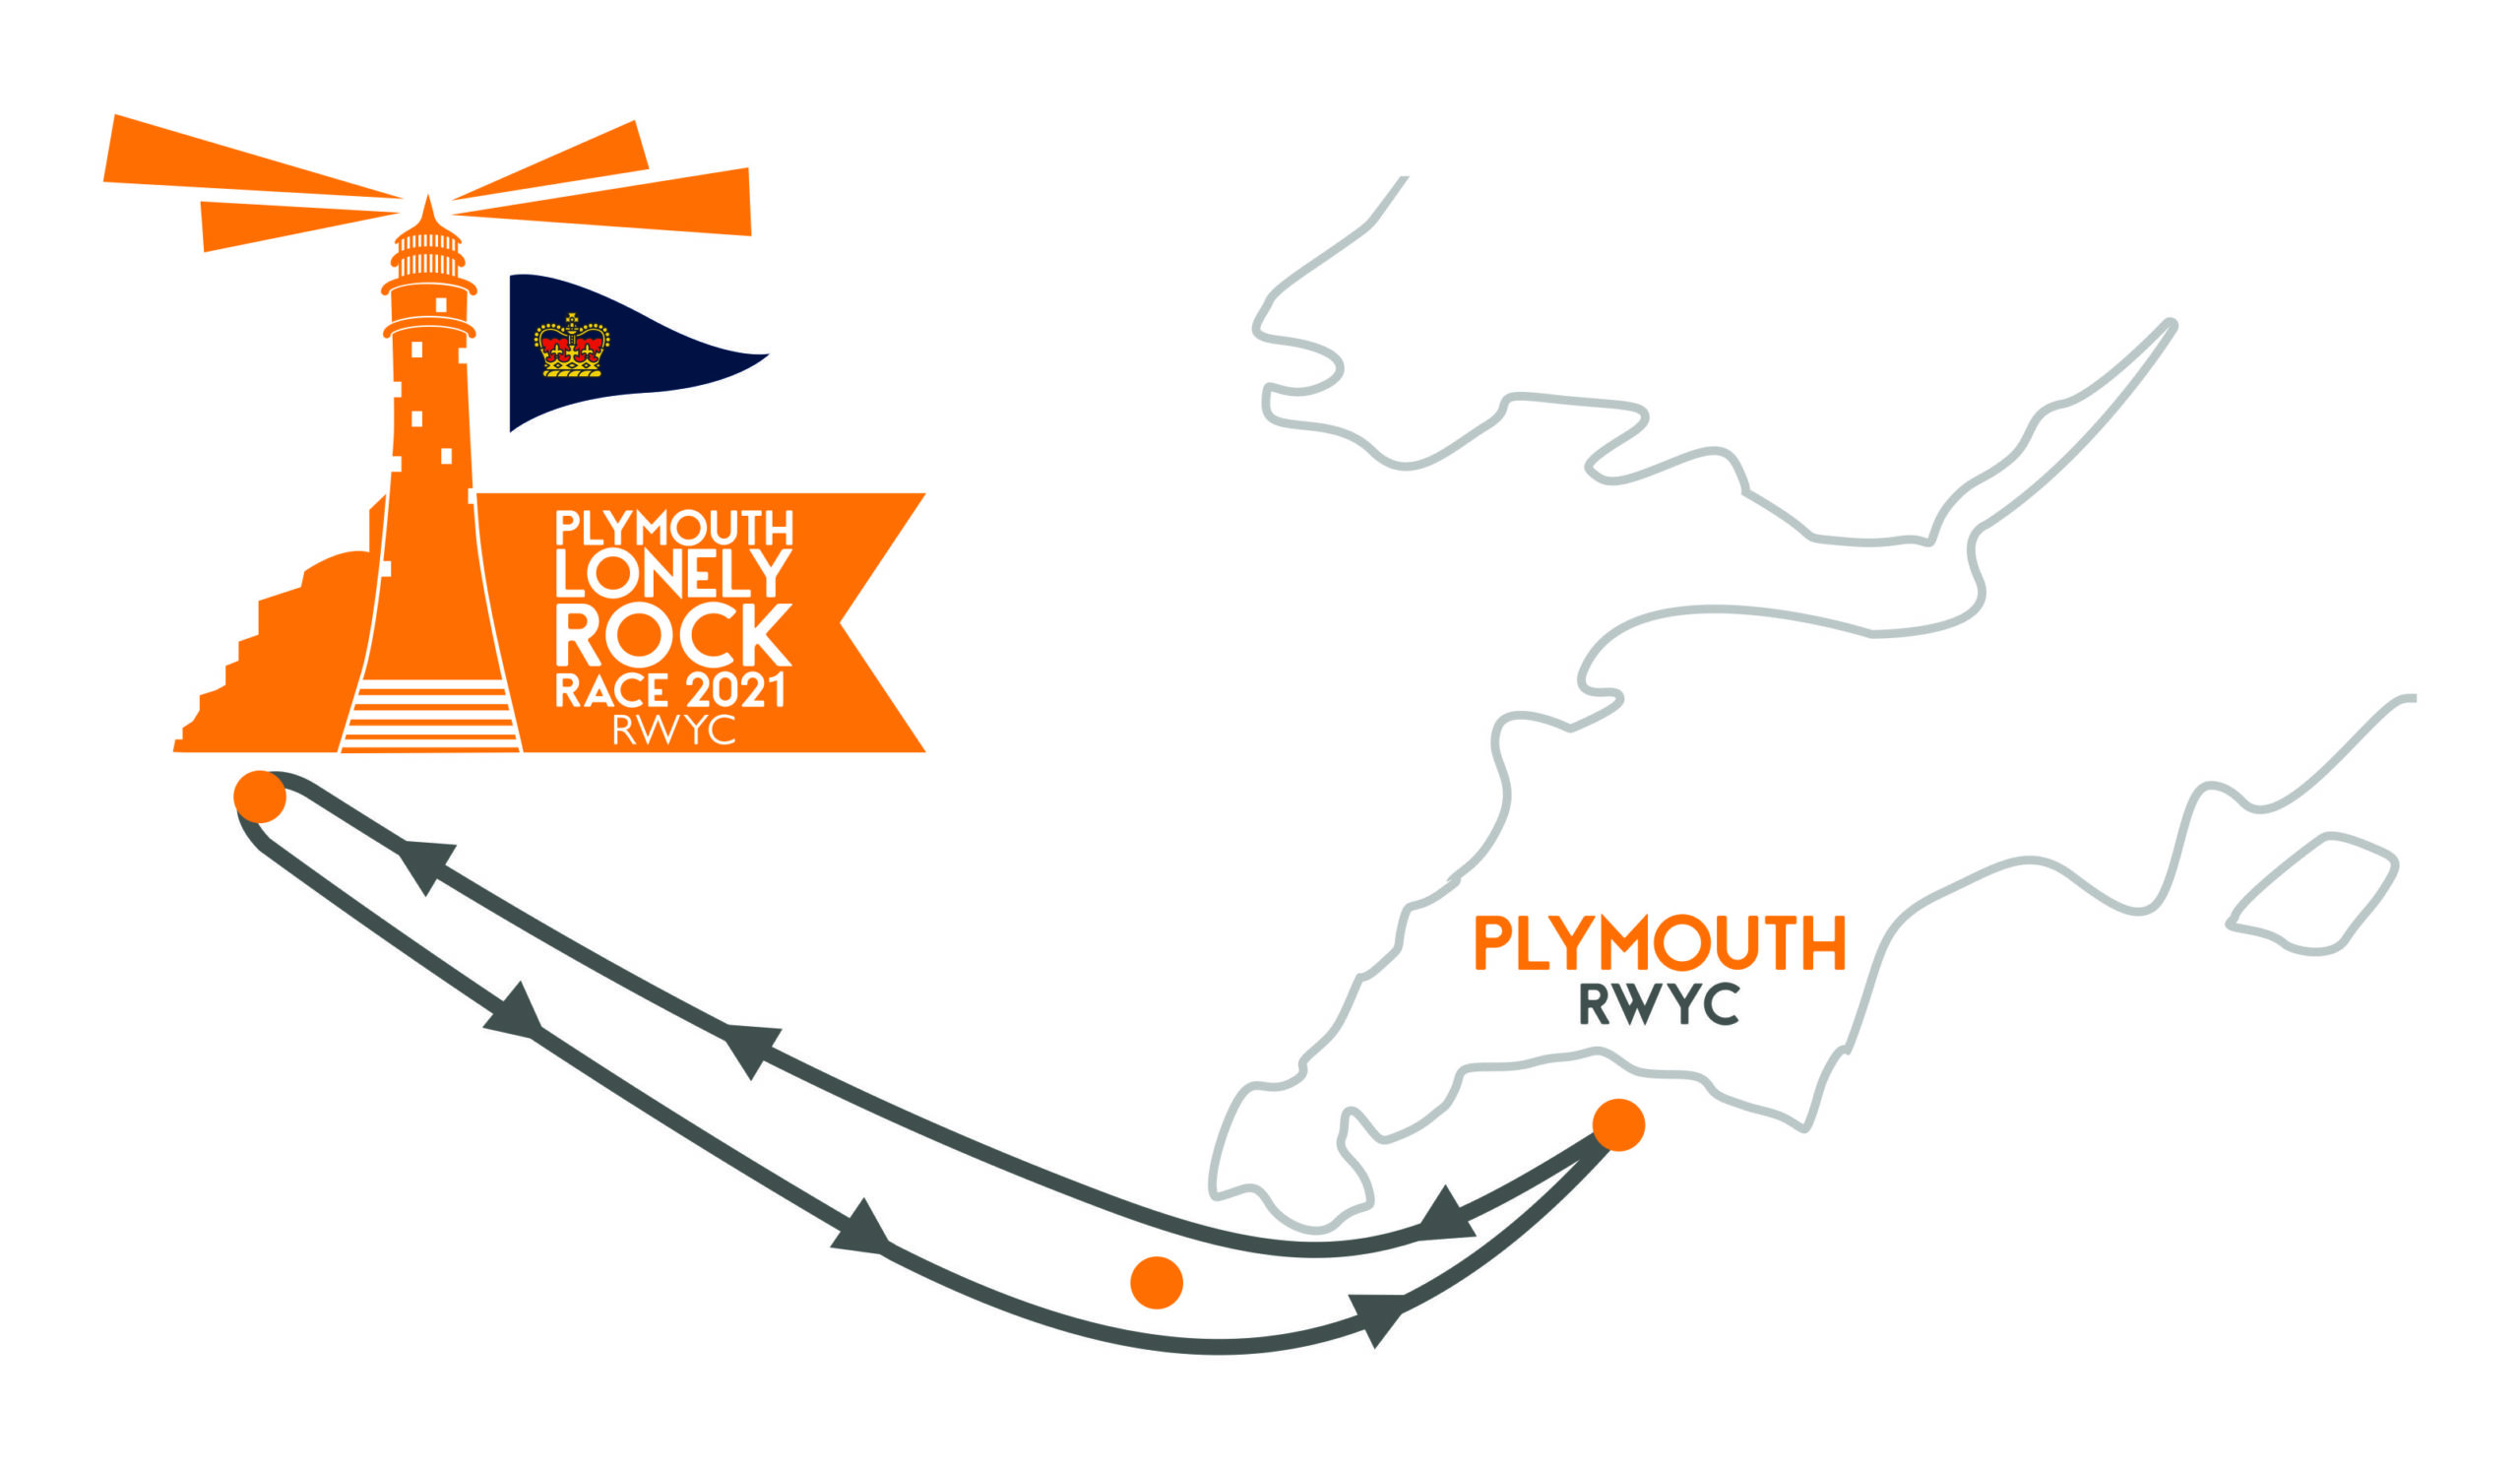 Plymouth Lonely Rock Race 2021 route logo